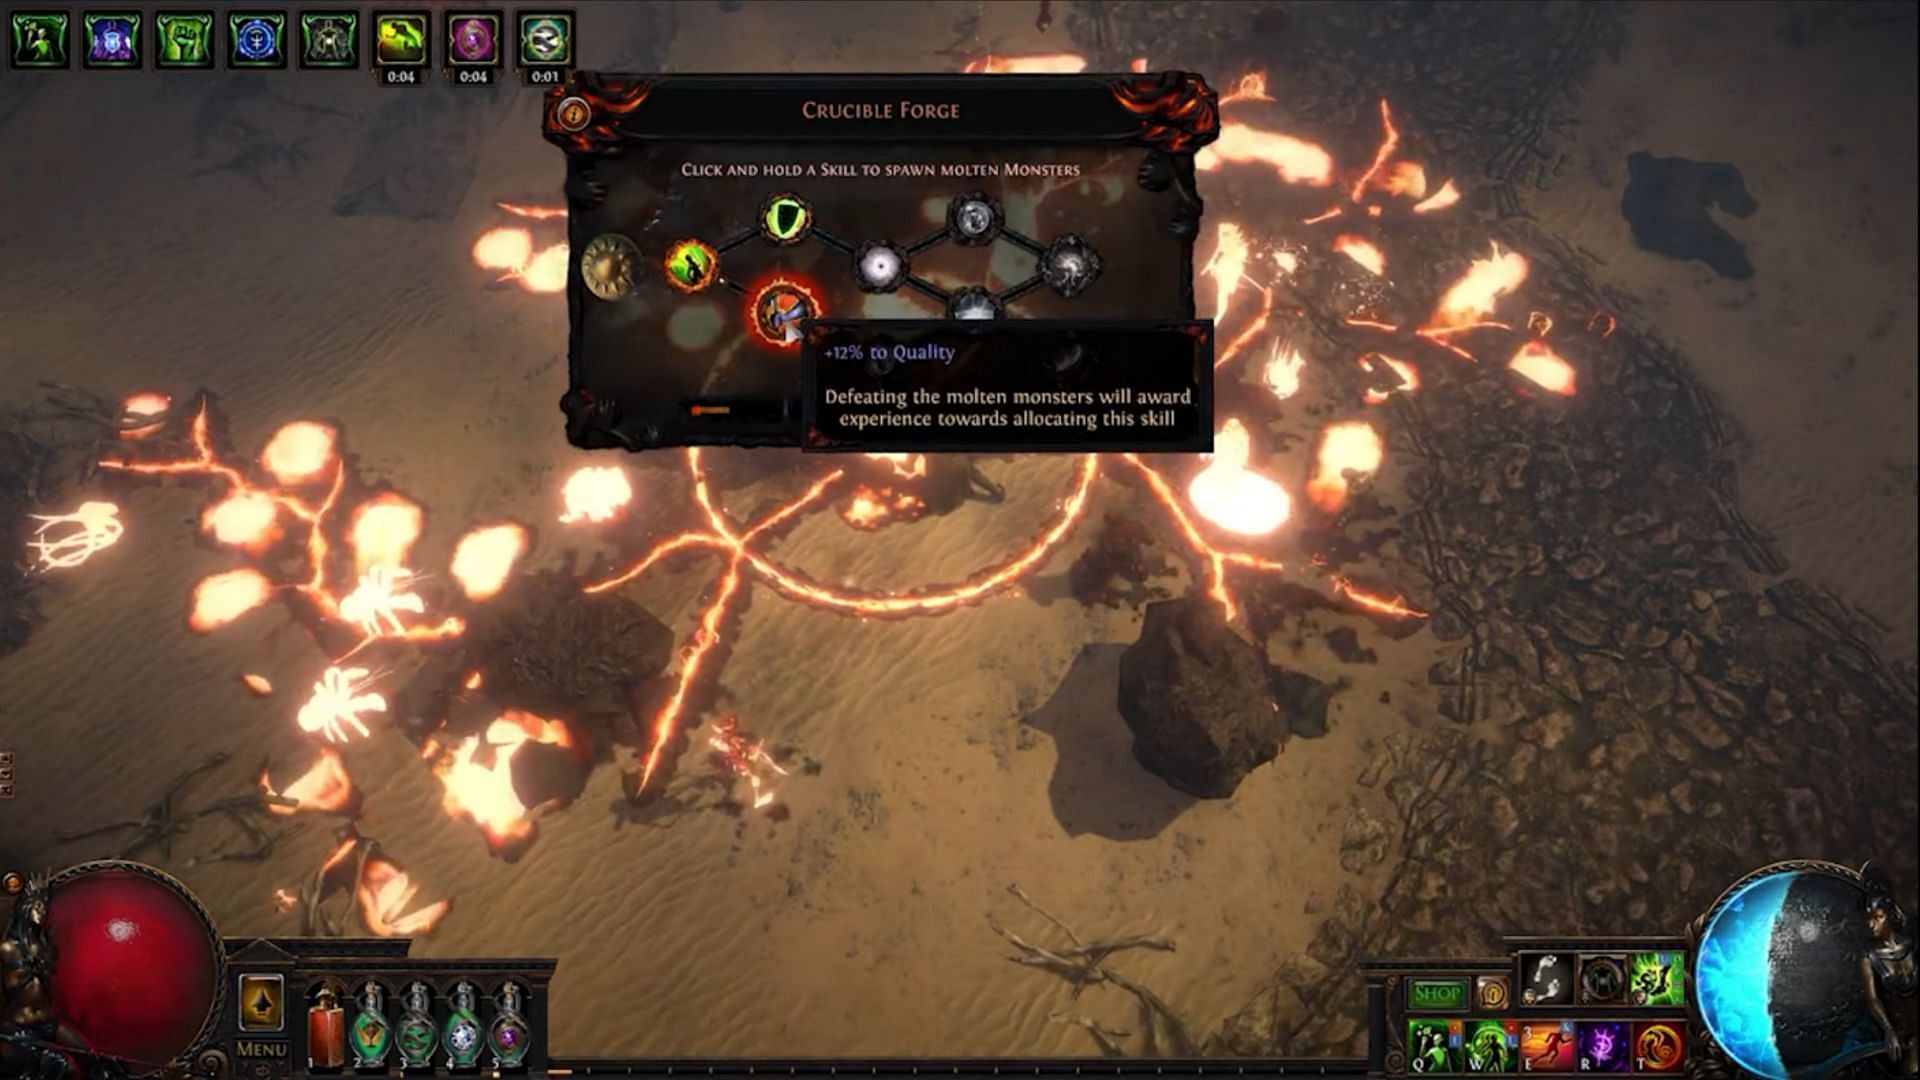 There are so many ways to play Path of Exile